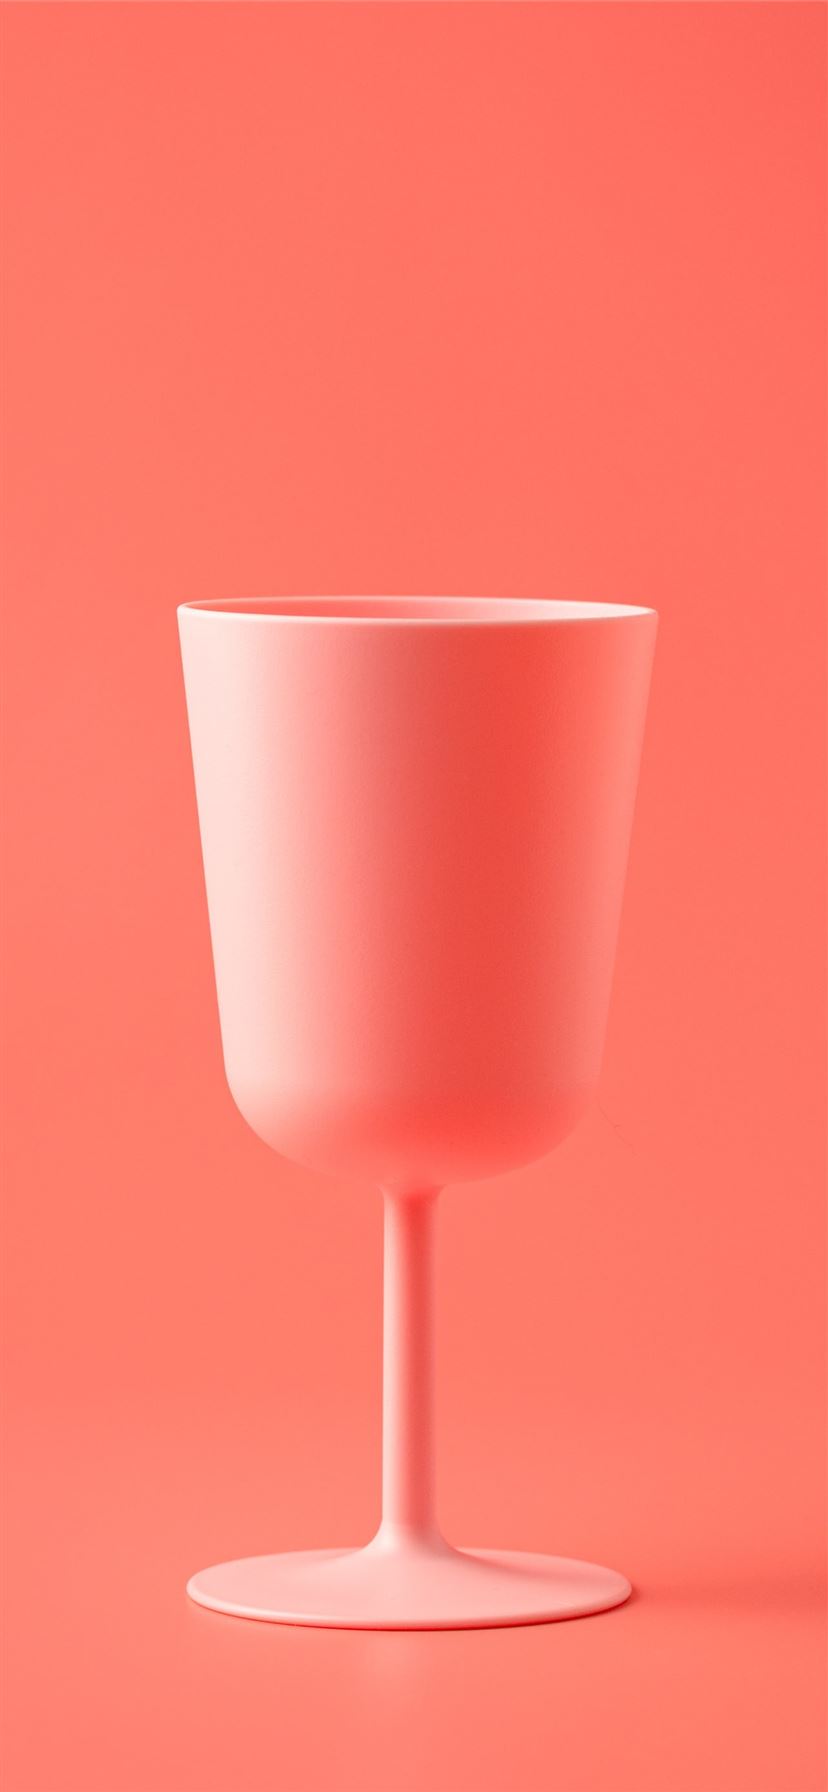 pink cup photo iPhone 11 wallpaper 